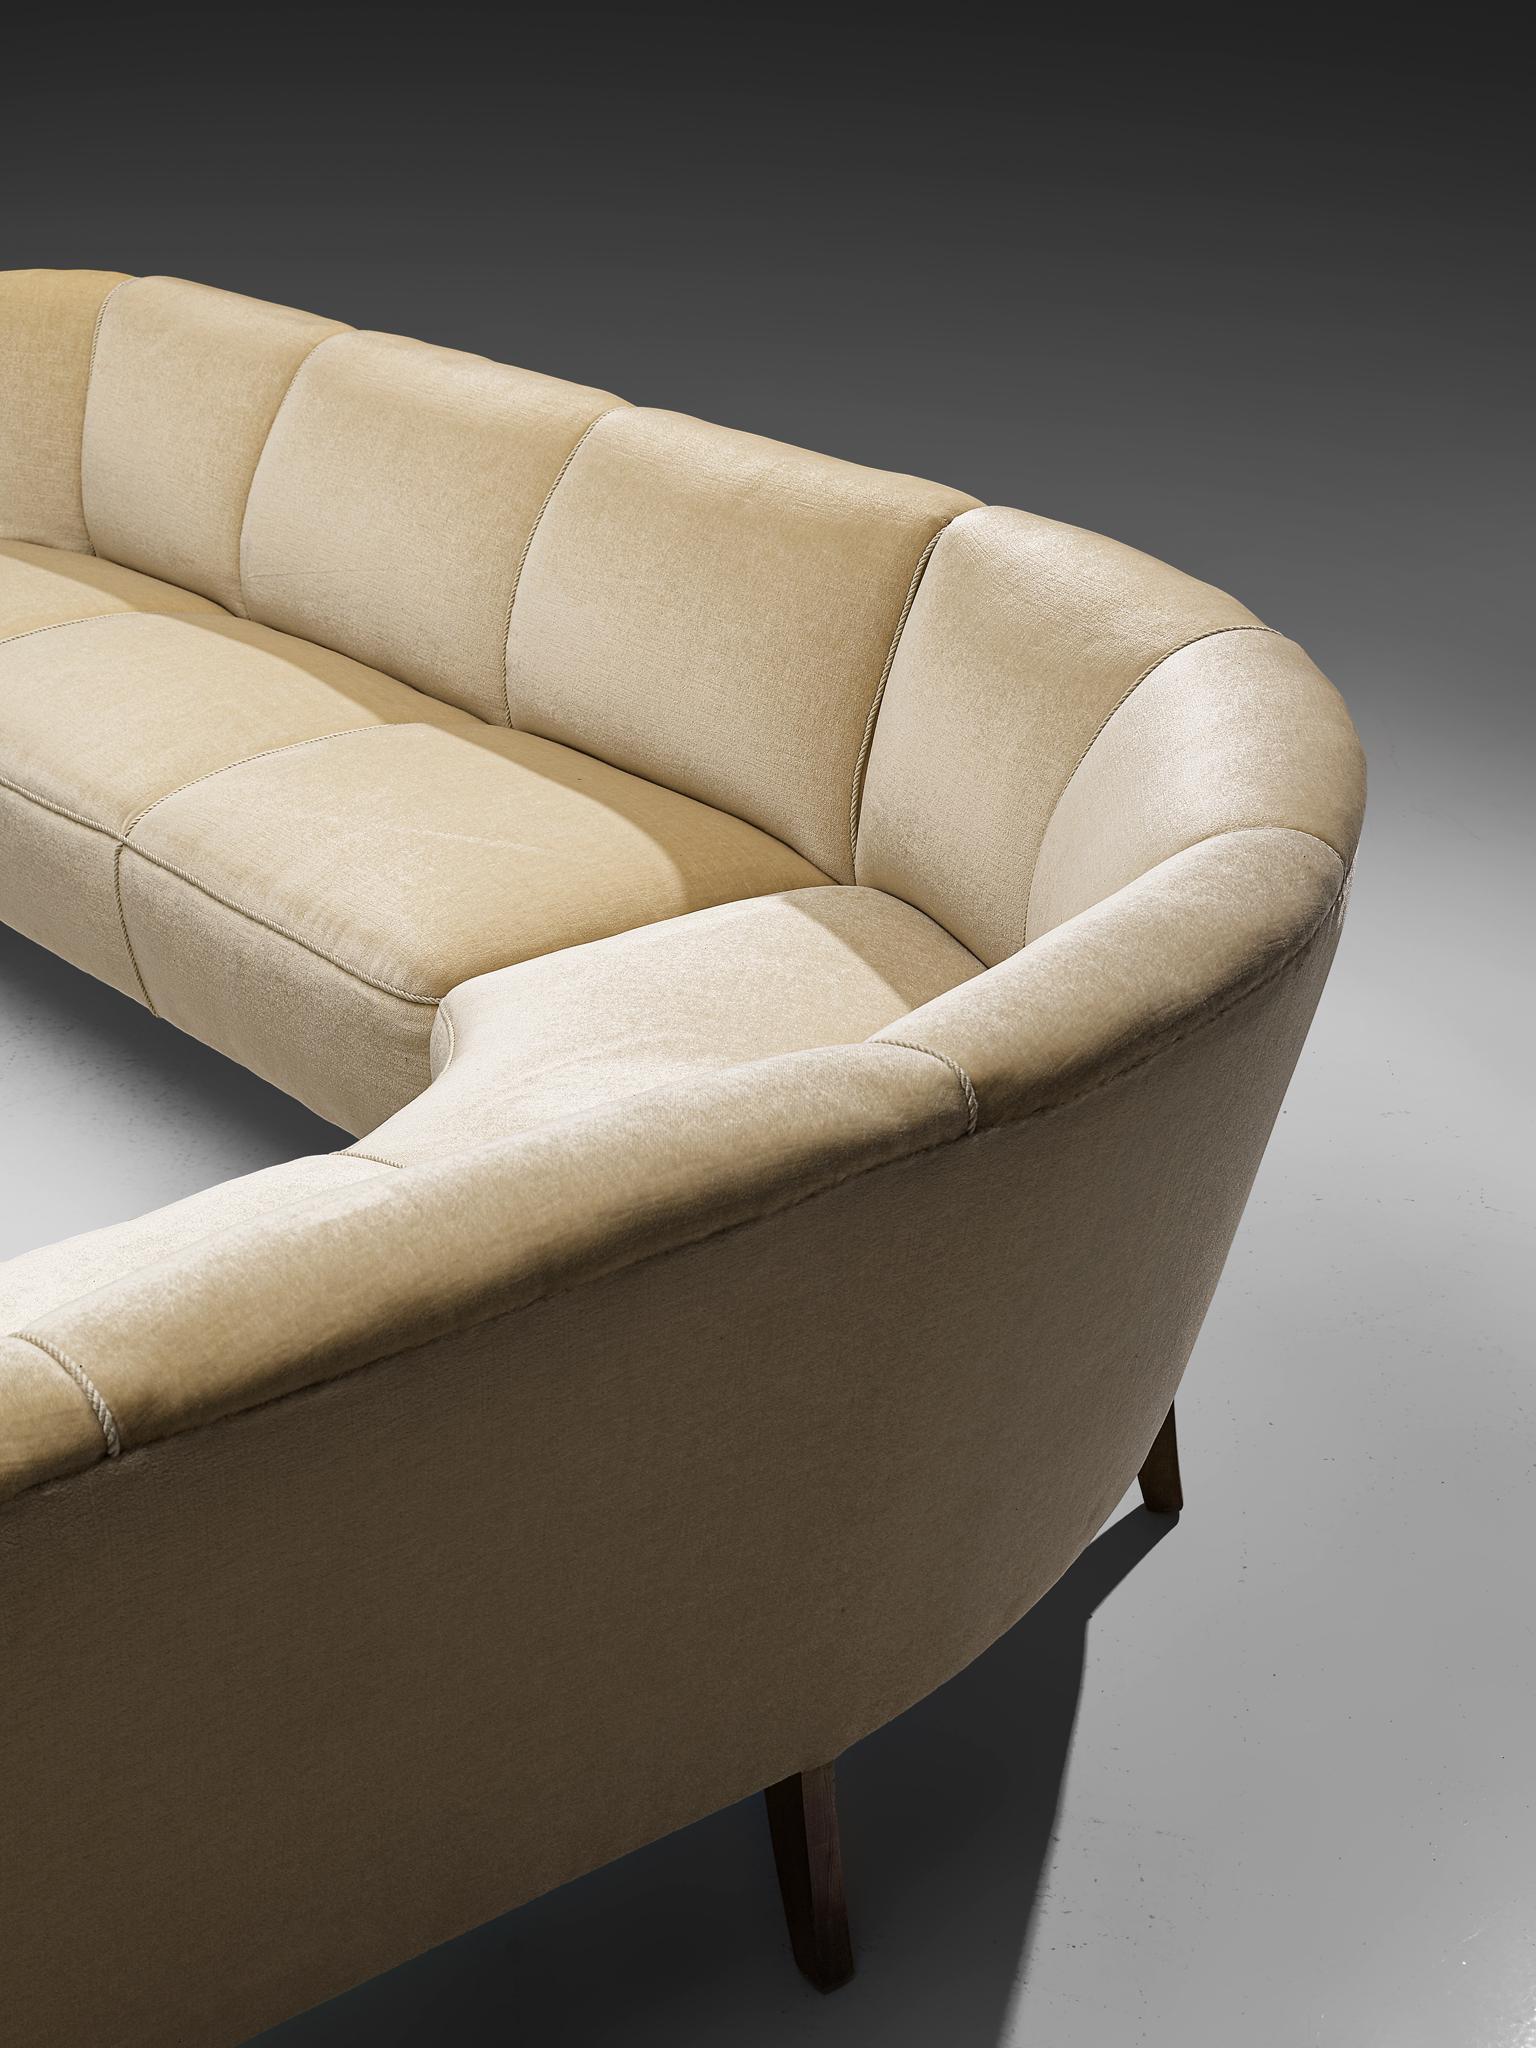 Mohair Danish L-Shaped Sofa in Off-White Upholstery